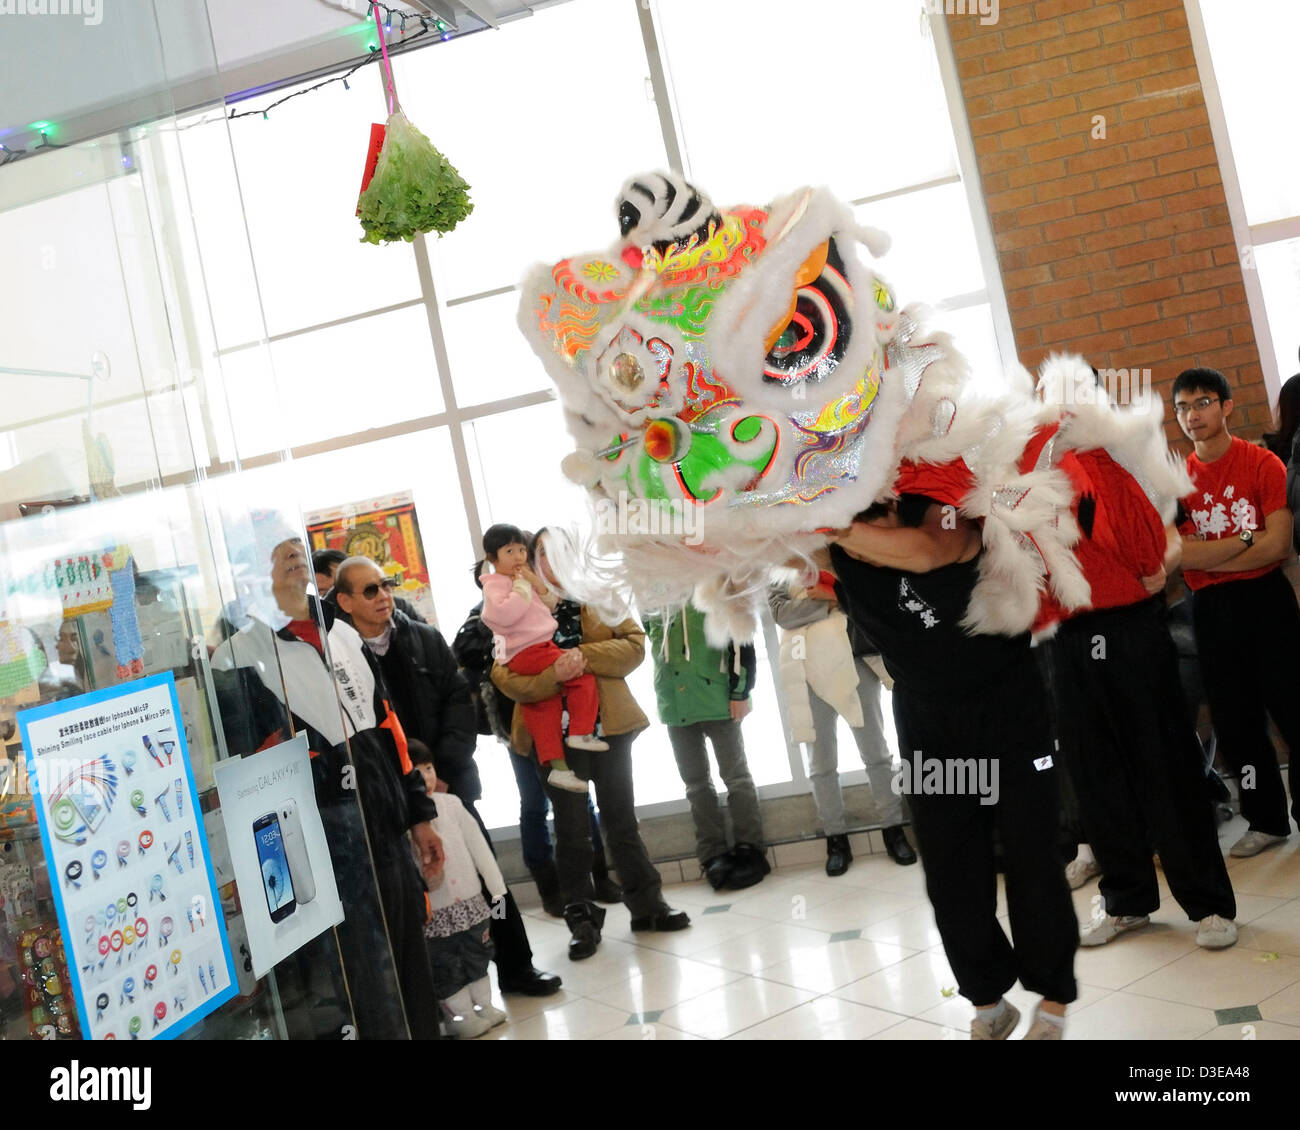 February 16, 2013. Toronto, Canada. Traditional Chinese Lion Dance at Pacific Mall performing a customary Choy Cheng (Cai Qing), meaning plucking the greens, to bring good luck and fortune to the business visited.  (DCP/N8N) Stock Photo